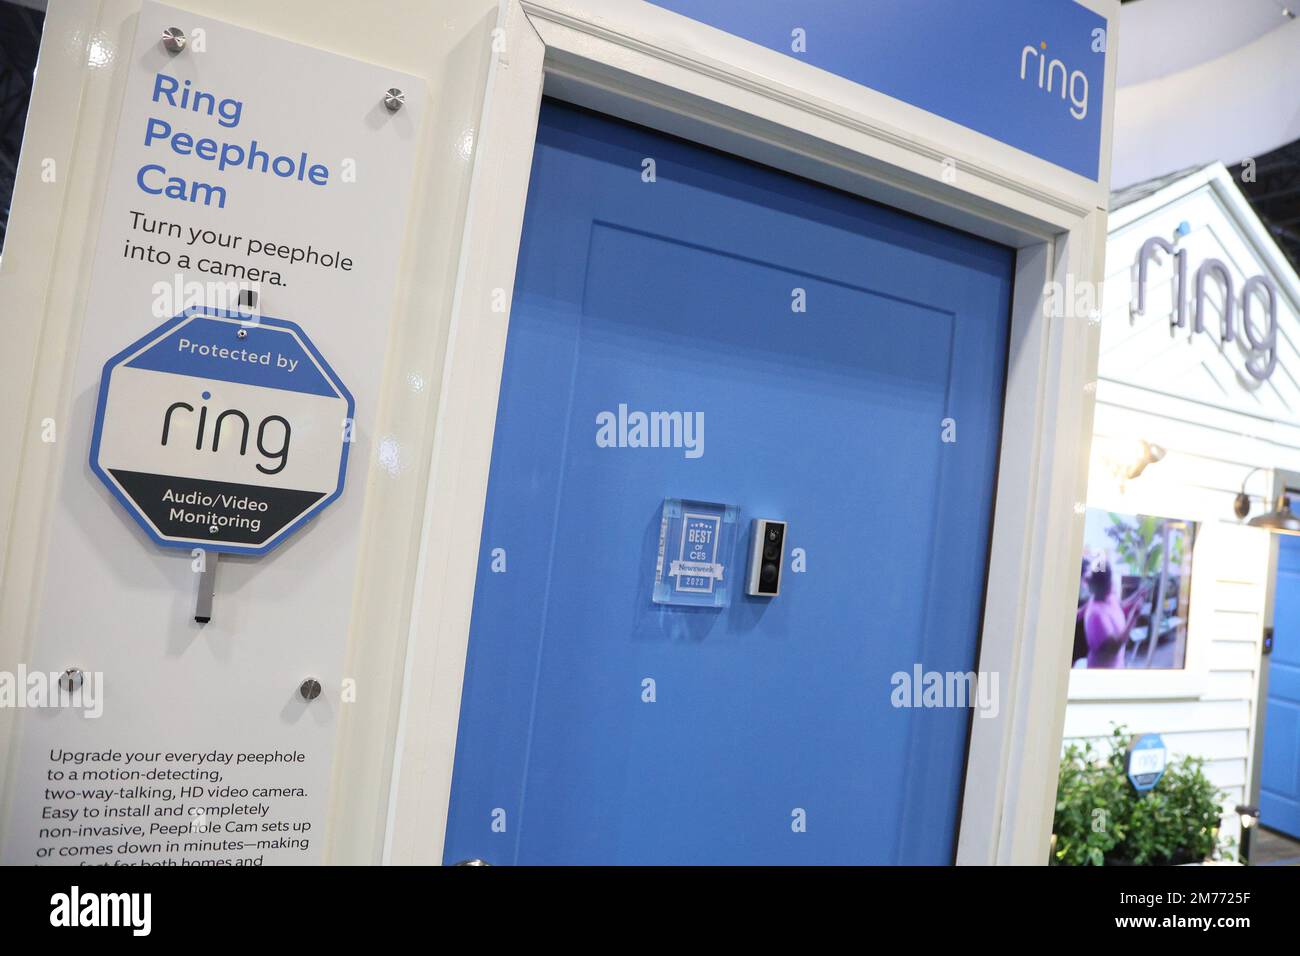 https://c8.alamy.com/comp/2M7725F/las-vegas-united-states-07th-jan-2023-a-view-of-the-recently-unveiled-ring-peephole-cam-on-display-during-the-2023-international-ces-at-the-venetian-convention-center-in-las-vegas-nevada-on-saturday-january-7-2023-photo-by-james-atoaupi-credit-upialamy-live-news-2M7725F.jpg